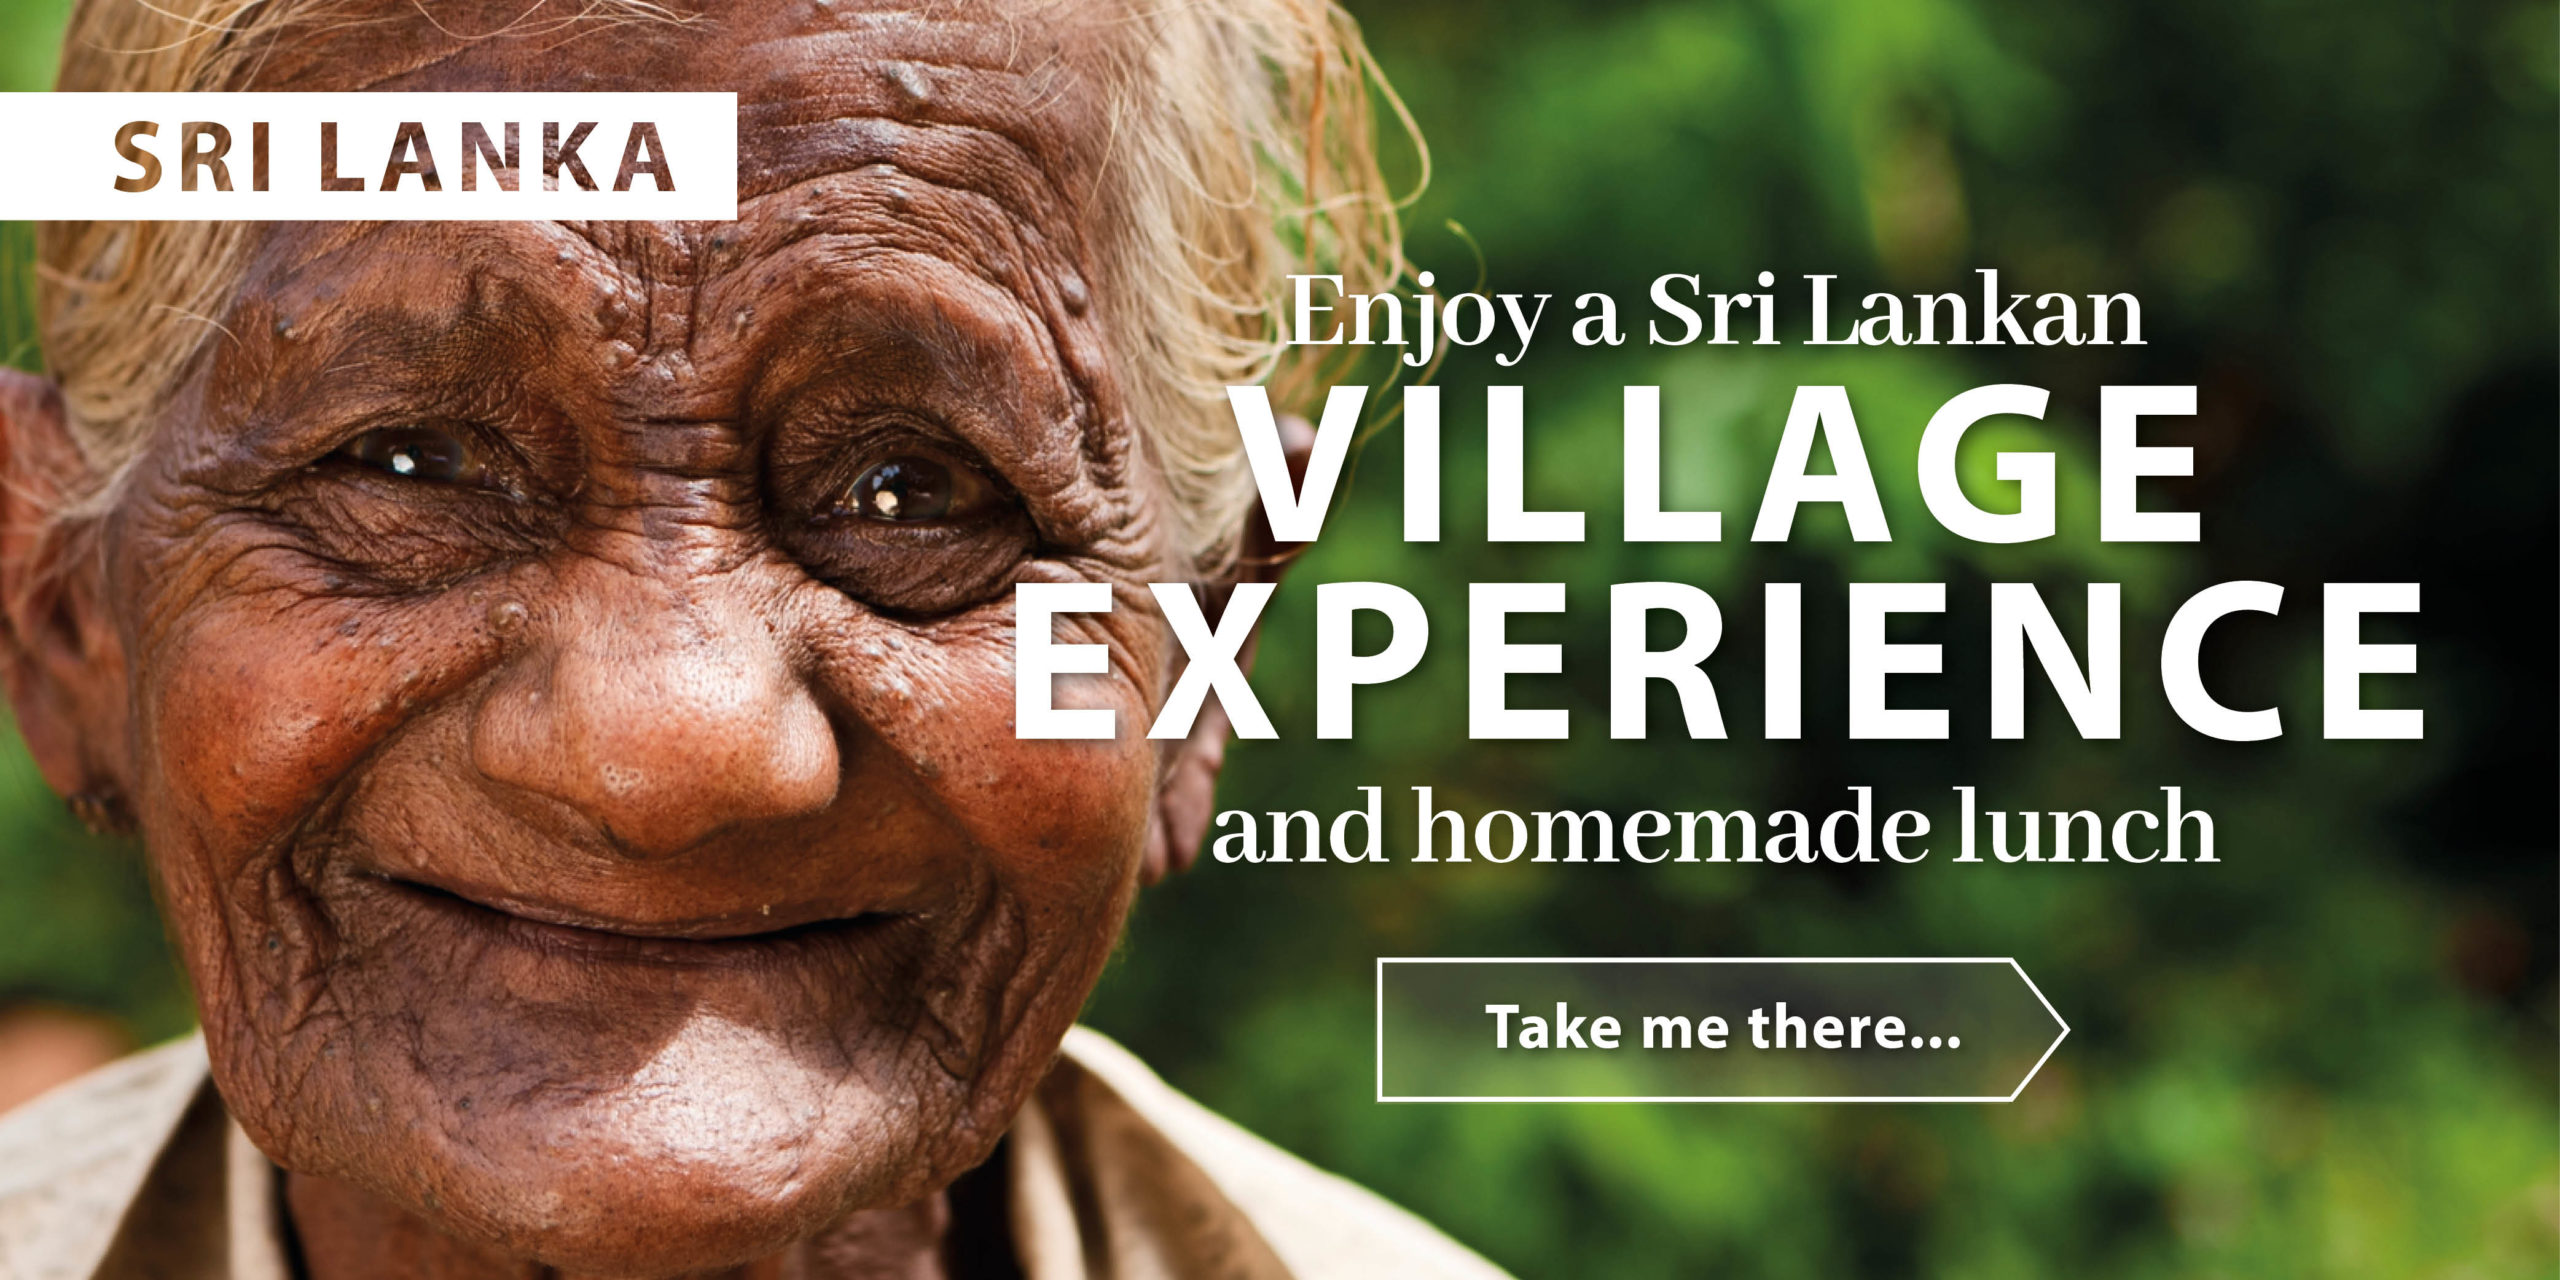 Authentic experience in Sri Lanka